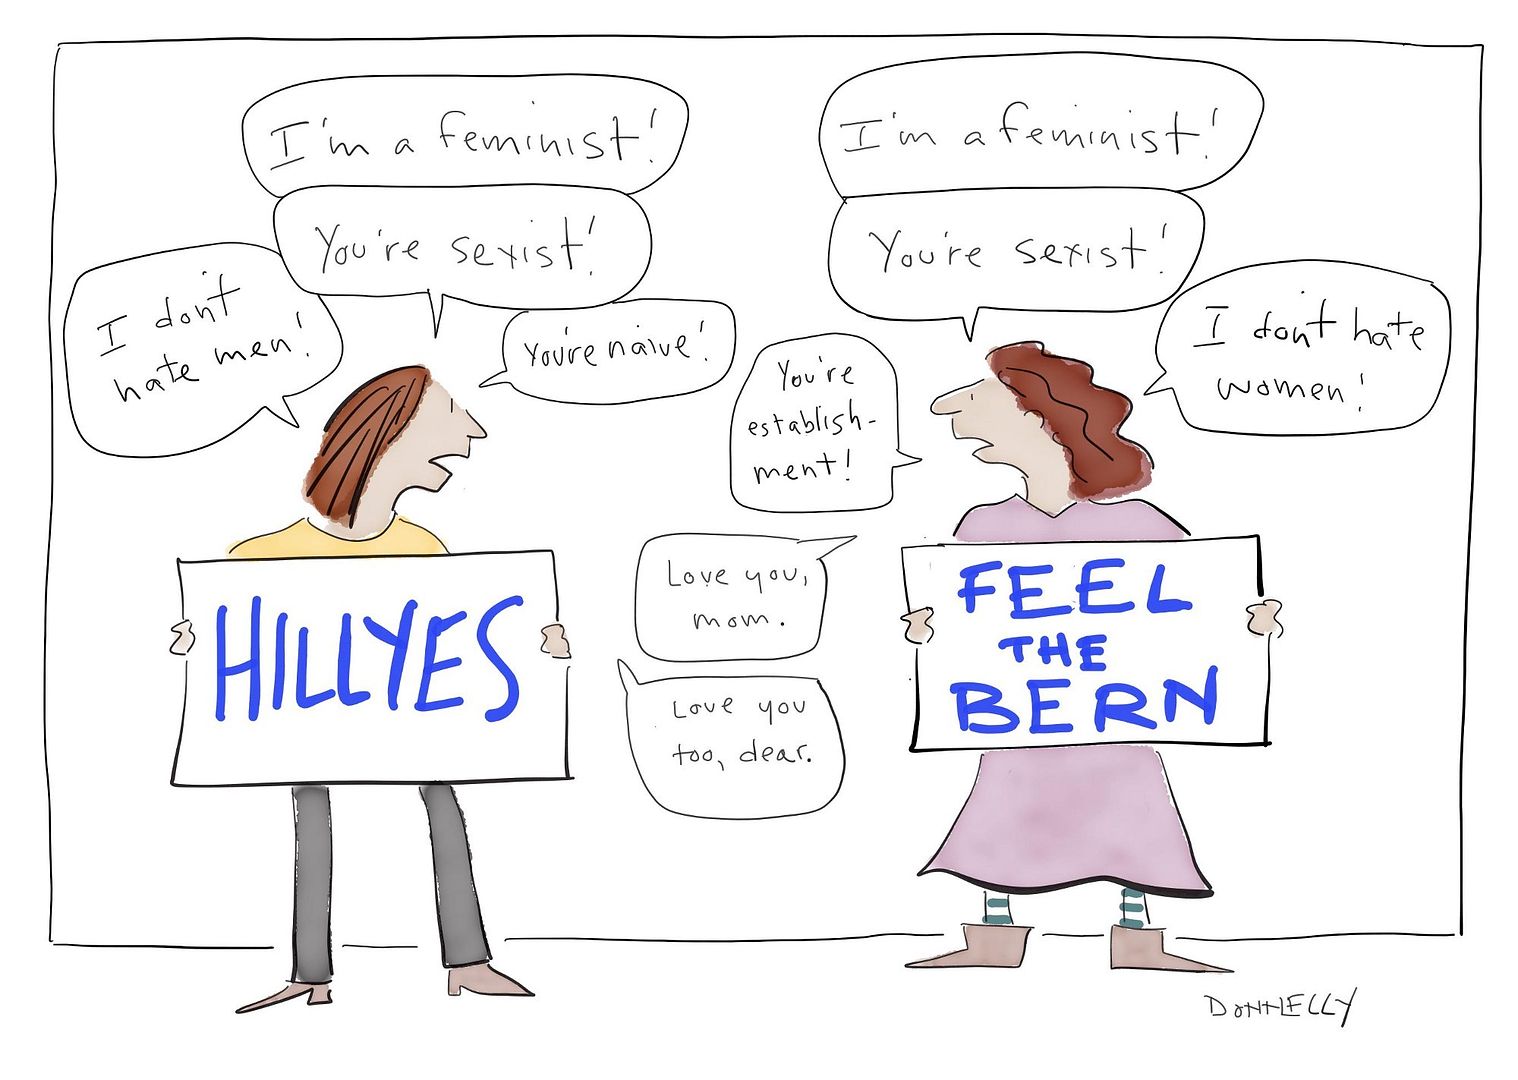 It doesn't have to be hostile. Great cartoon about the Feminist Divide by Liza Donnelly